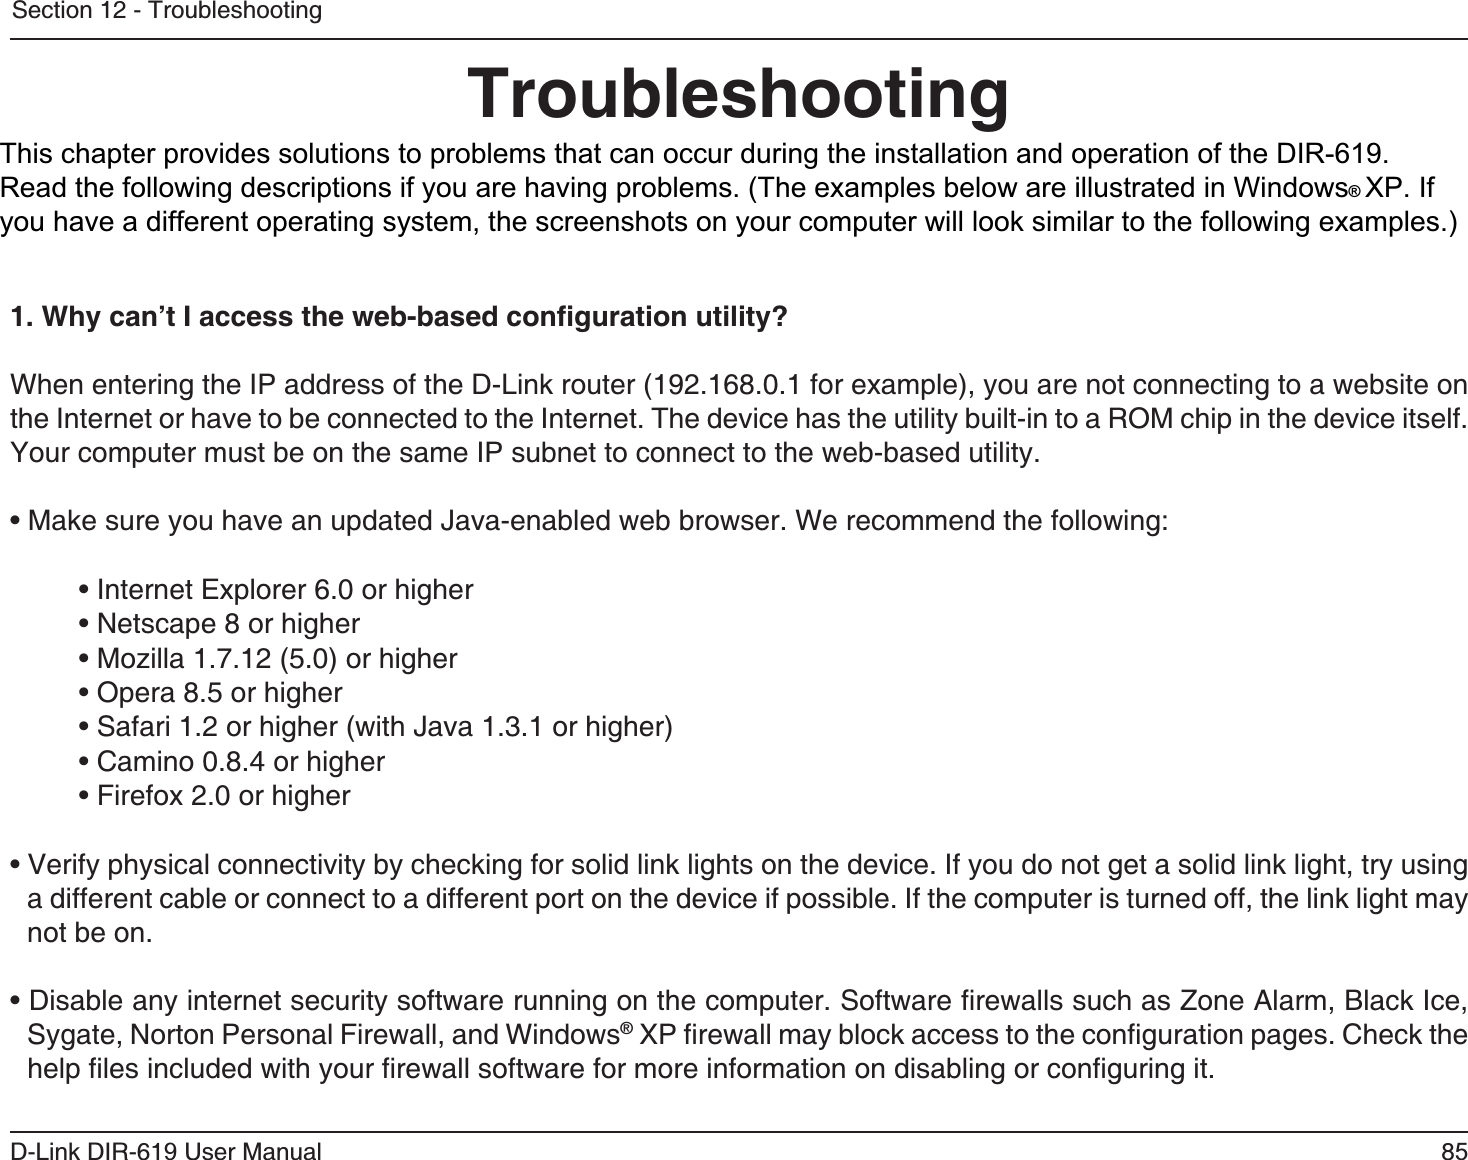 8D-Link DIR-61 User ManualSection 12 - TroubleshootingTroubleshootingThis chapter provides solutions to problems that can occur during the installation and operation of the DIR-618. Read the following descriptions if you are having problems.  (The examples below are illustrated in Windows® XP.  Ifyou have a different operating system, the screenshots on your computer will look similar to the following examples.)1. Why can’t I access the web-based conﬁguration utility?When entering the IP address of the D-Link router (192.168.0.1 for example), you are not connecting to a website on the Internet or have to be connected to the Internet. The device has the utility built-in to a ROM chip in the device itself.Your computer must be on the same IP subnet to connect to the web-based utility. • Make sure you have an updated Java-enabled web browser. We recommend the following: • Internet Explorer 6.0 or higher • Netscape 8 or higher • Mozilla 1.7.12 (5.0) or higher • Opera 8.5 or higher • Safari 1.2 or higher (with Java 1.3.1 or higher) • Camino 0.8.4 or higher • Firefox 2.0 or higher • Verify physical connectivity by checking for solid link lights on the device. If you do not get a solid link light, try using a different cable or connect to a different port on the device if possible. If the computer is turned off, the link light may not be on.• Disable any internet security software running on the computer. Software ﬁrewalls such as Zone Alarm, Black Ice, Sygate, Norton Personal Firewall, and Windows® XP ﬁrewall may block access to the conﬁguration pages. Check the help ﬁles included with your ﬁrewall software for more information on disabling or conﬁguring it.This chapter provides solutions to problems that can occur during the installation and operation of the DIR-619.Read the following descriptions if you are having problems. (The examples below are illustrated in Windows®XP. Ifyou have a different operating system, the screenshots on your computer will look similar to the following examples.)